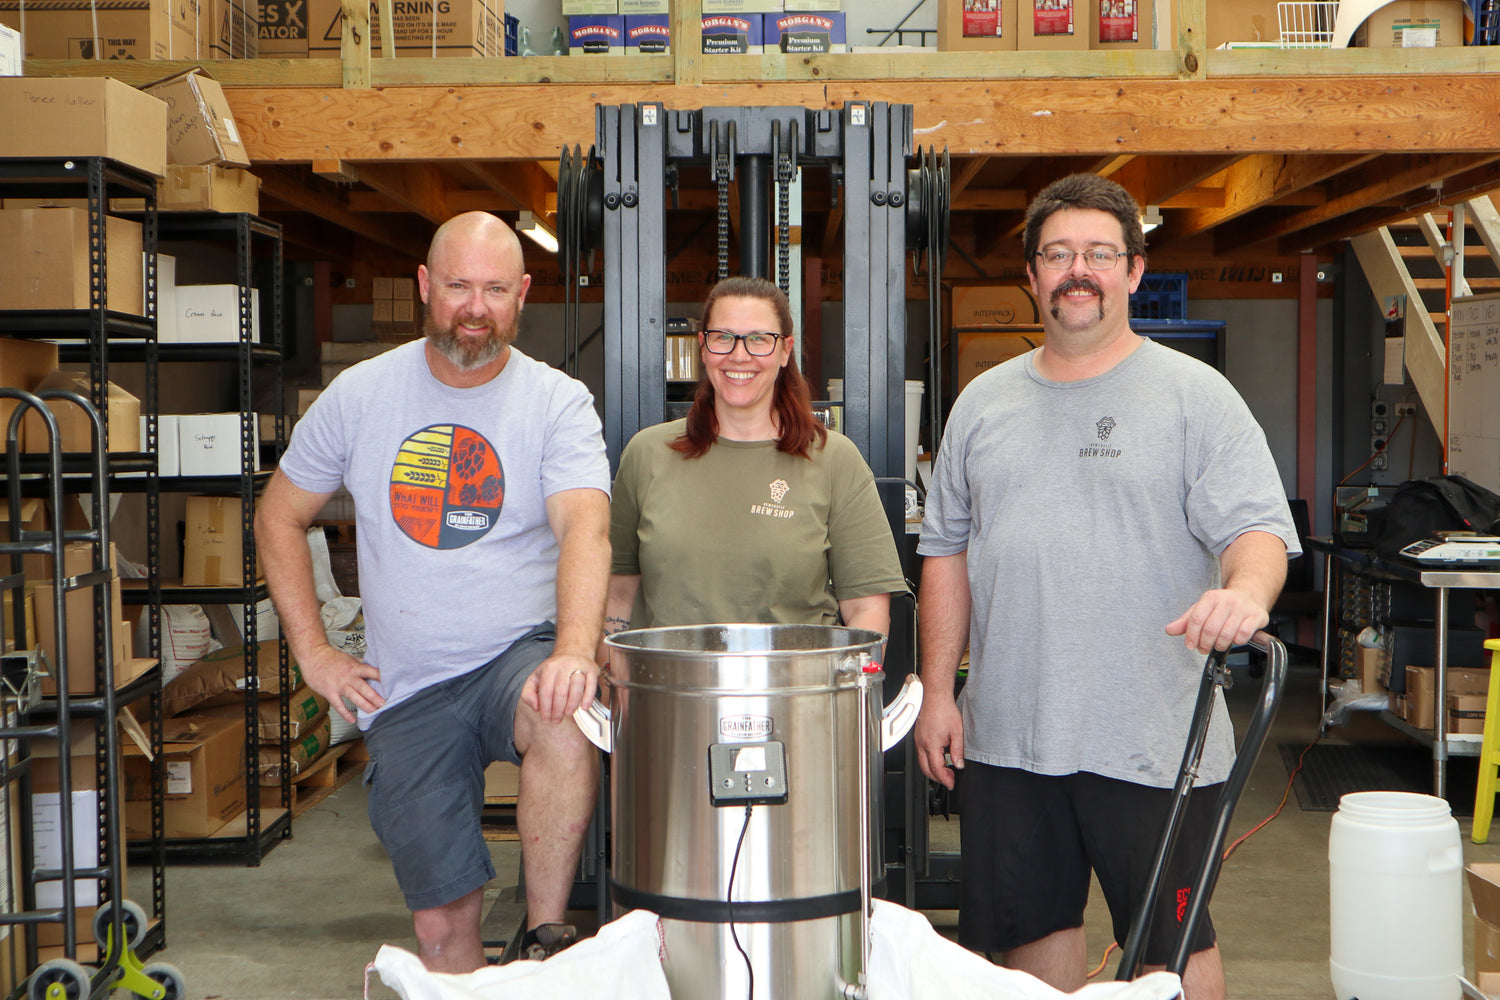 The Brew Crew getting a photo together after a successful brew day